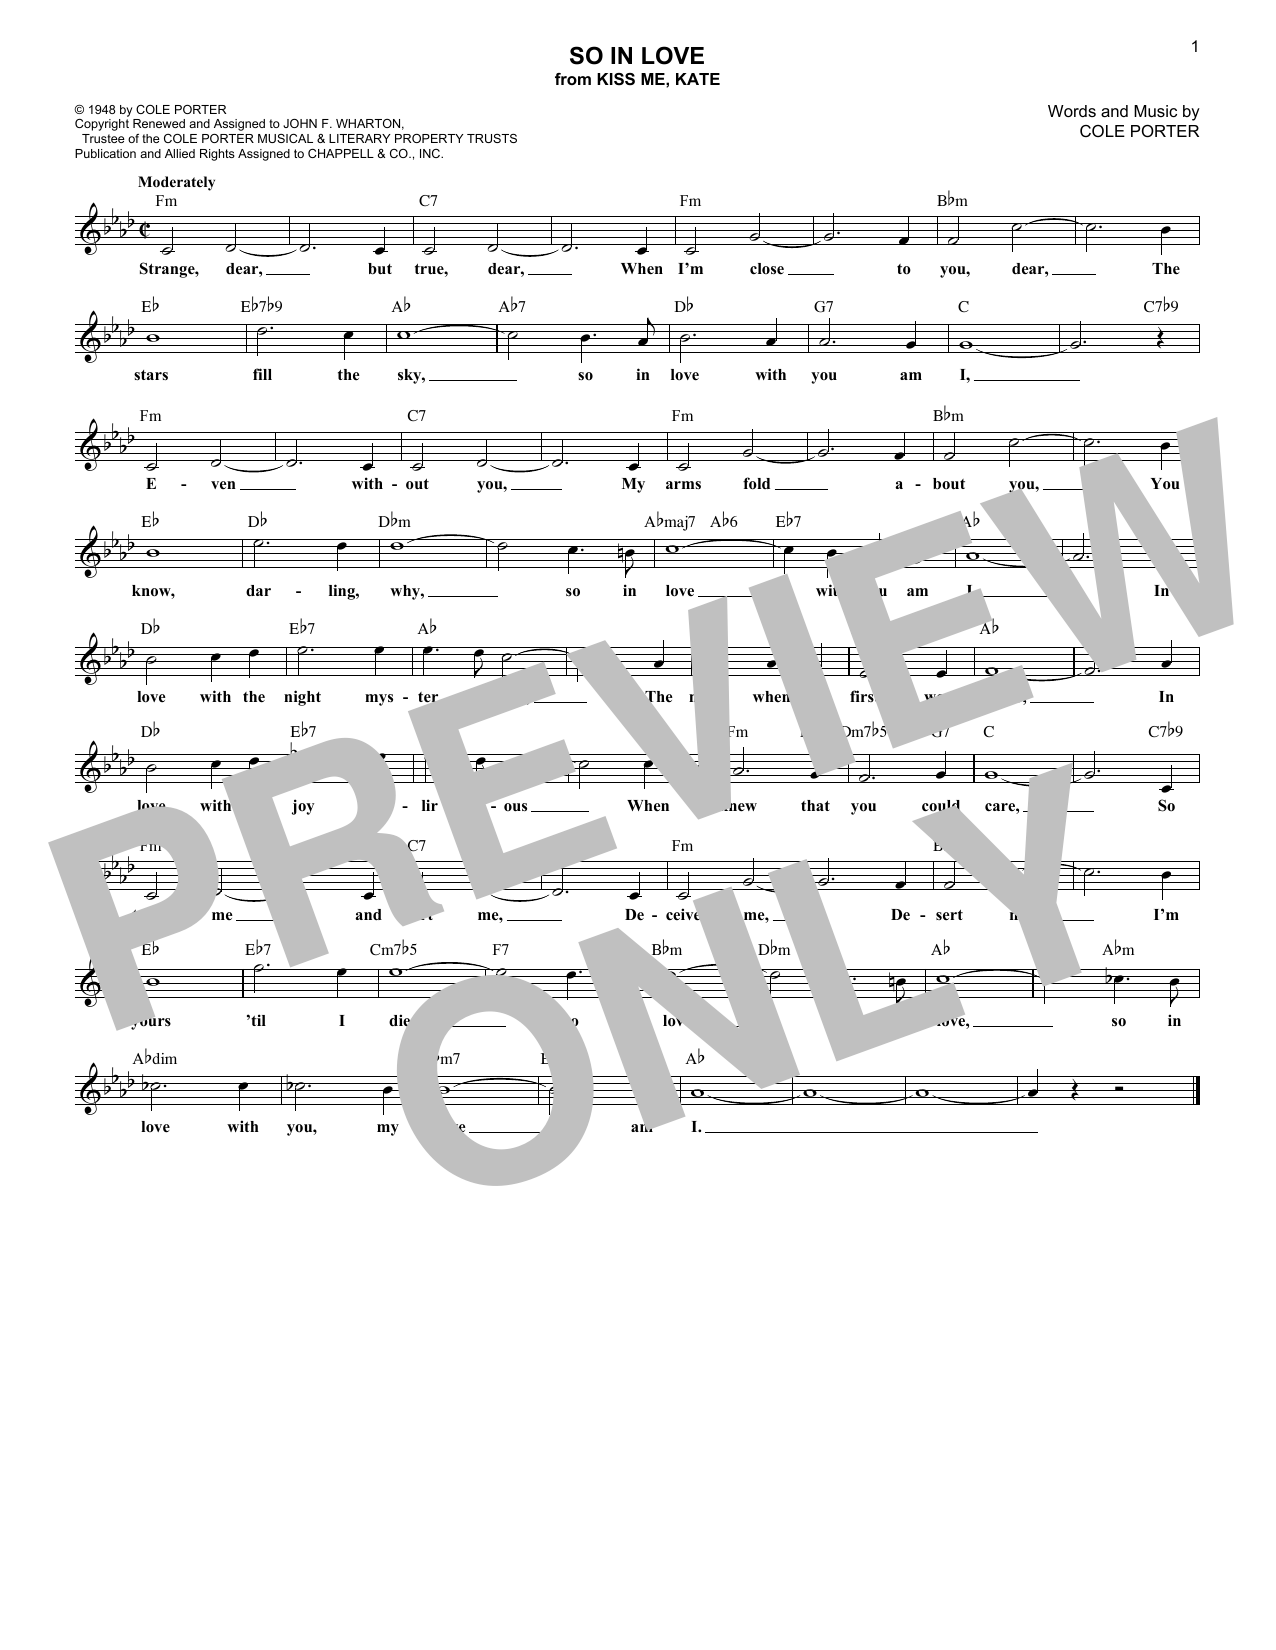 Download Cole Porter So In Love (from Kiss Me, Kate) Sheet Music